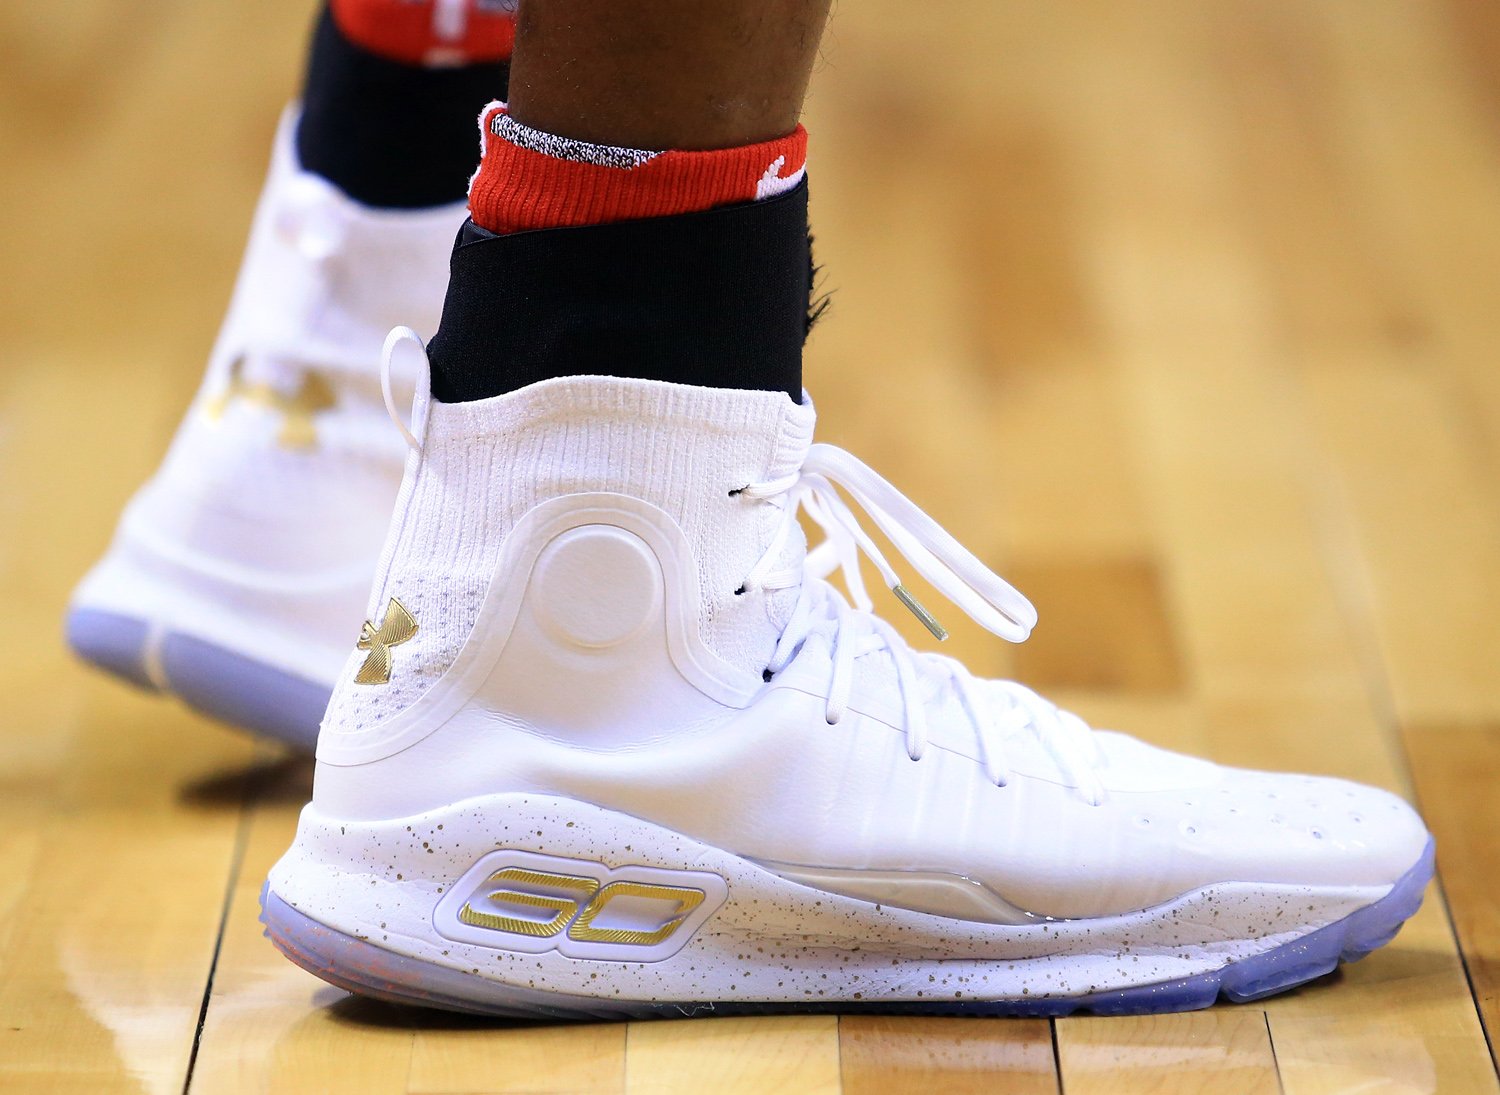 Delon Wright - Under Armour Curry 4